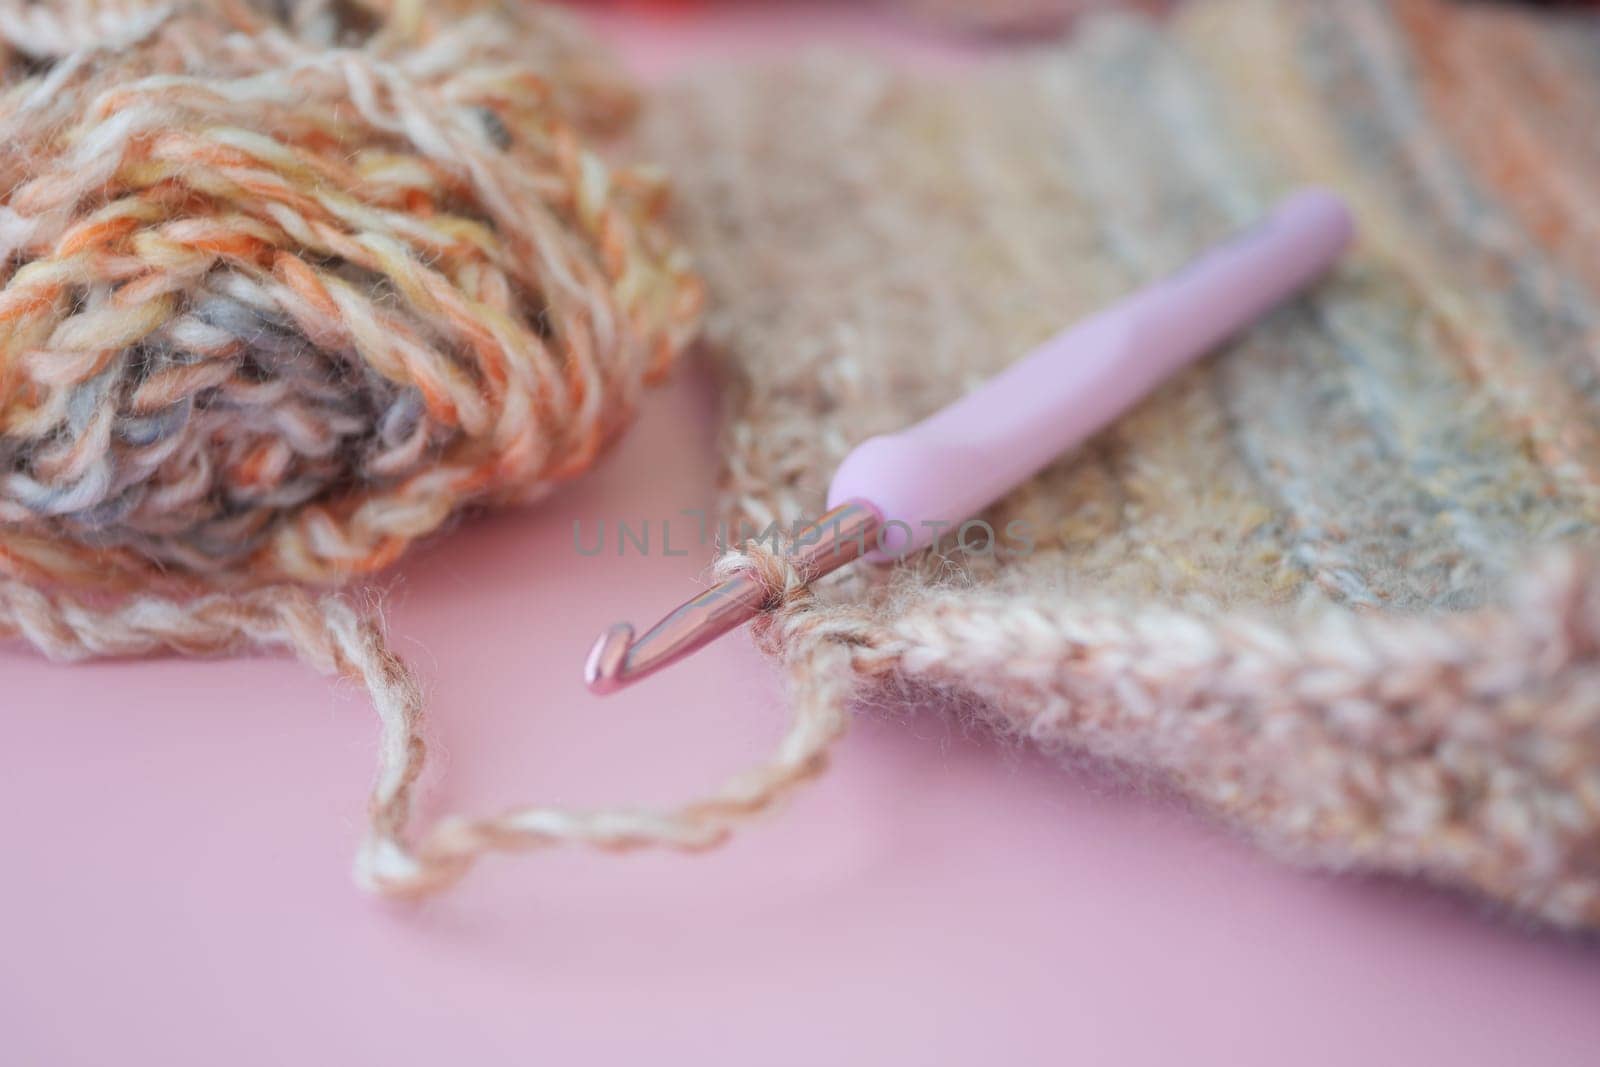 a close up of a crochet hook on a piece of yarn on a pink surface . High quality